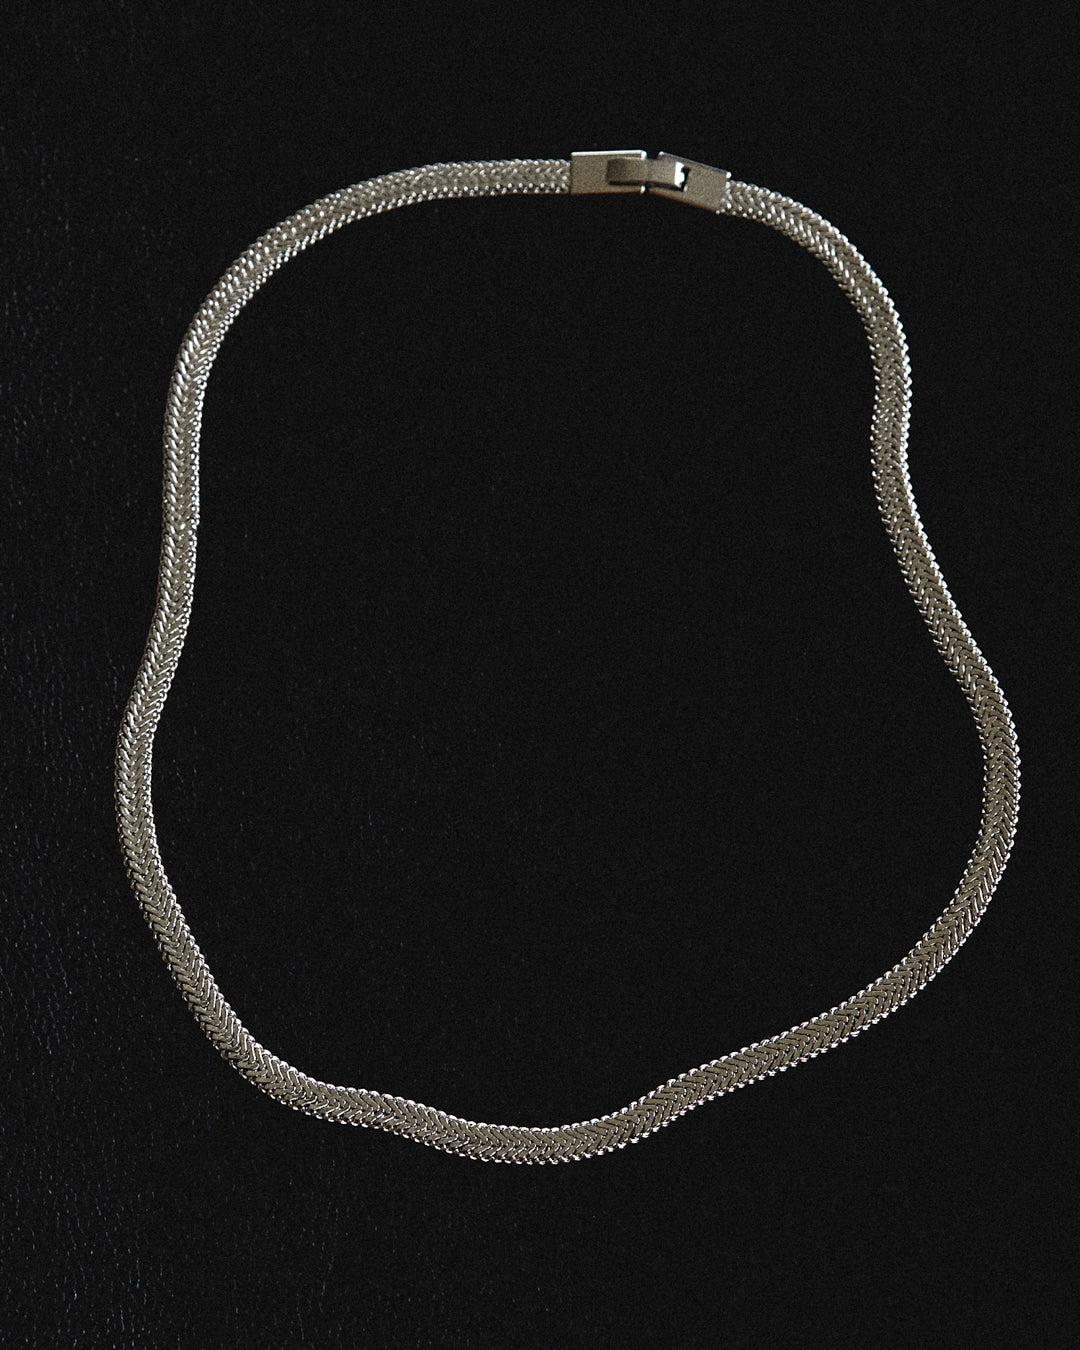 Arezou Chain by LUV AJ in Silver